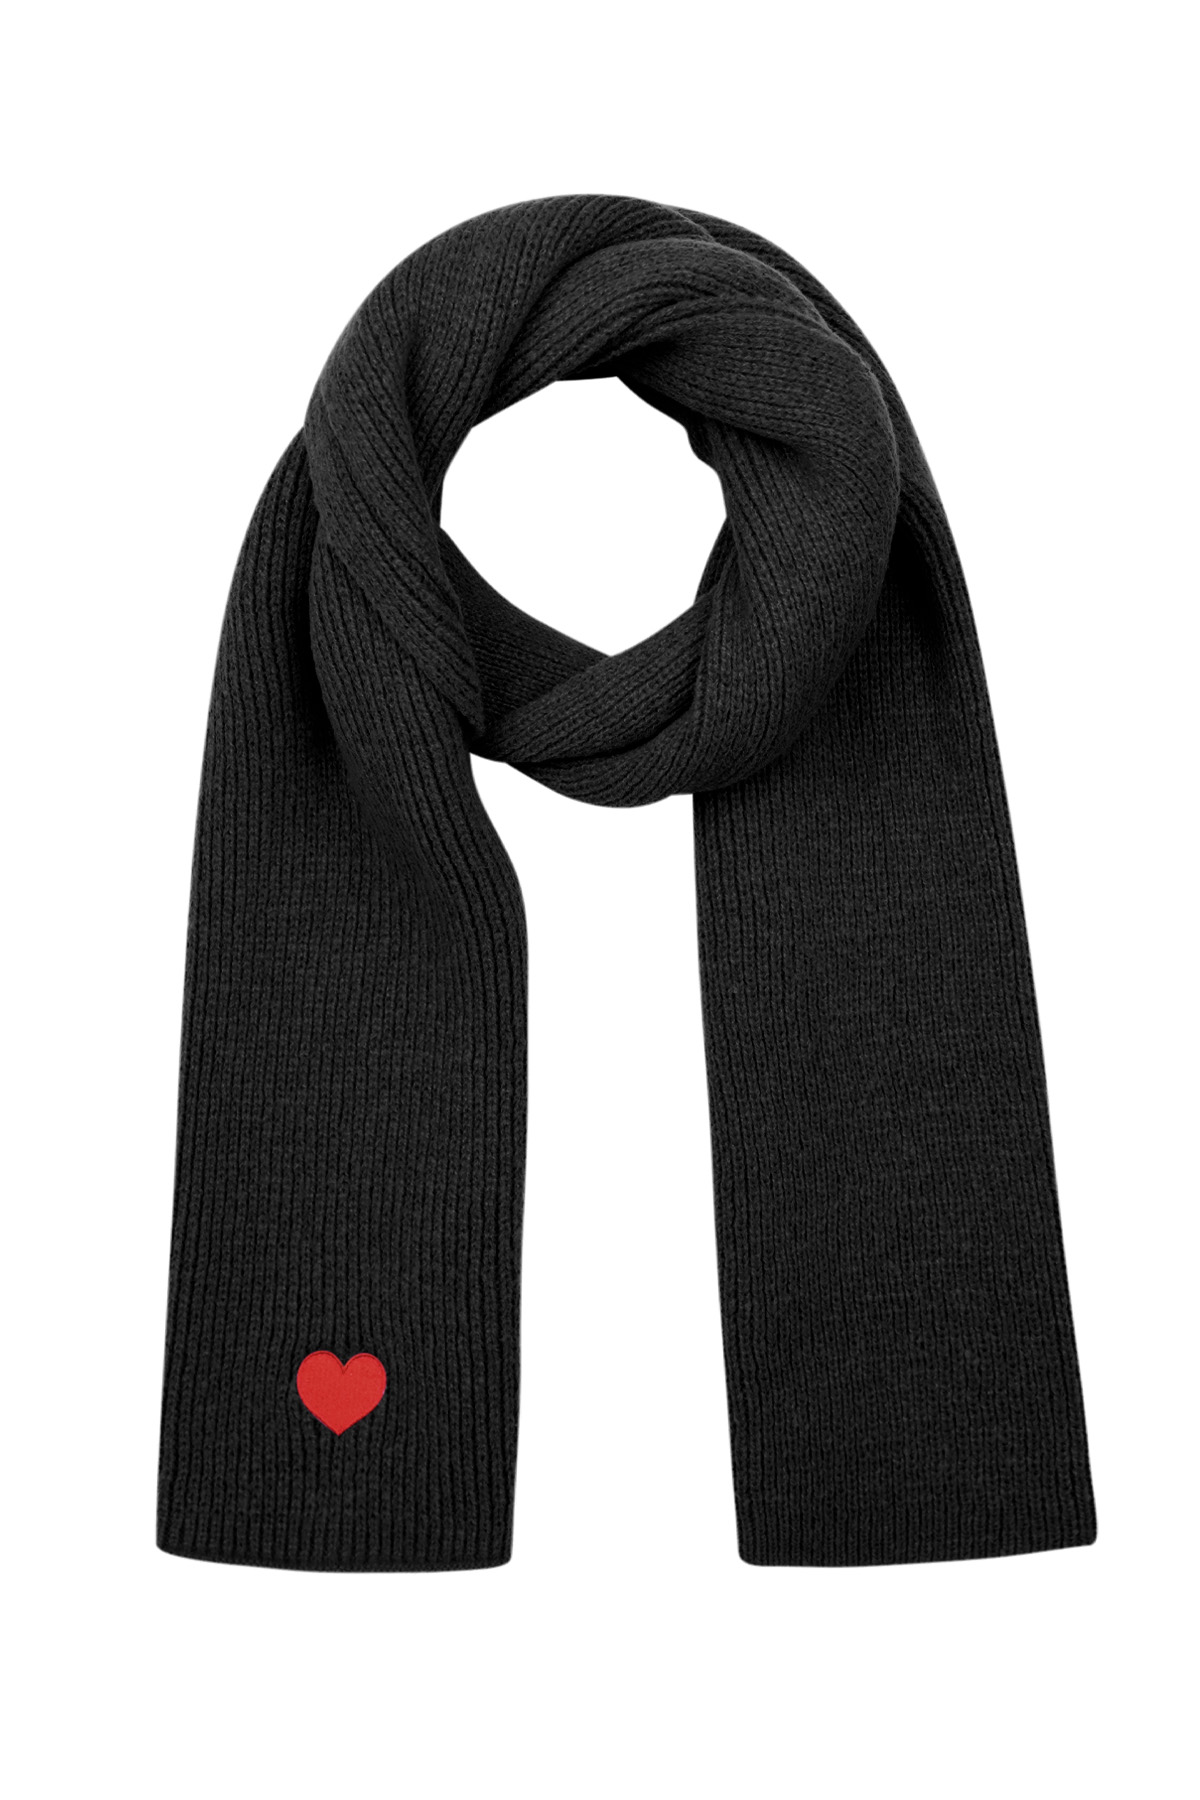 Winter scarf with heart detail - black 